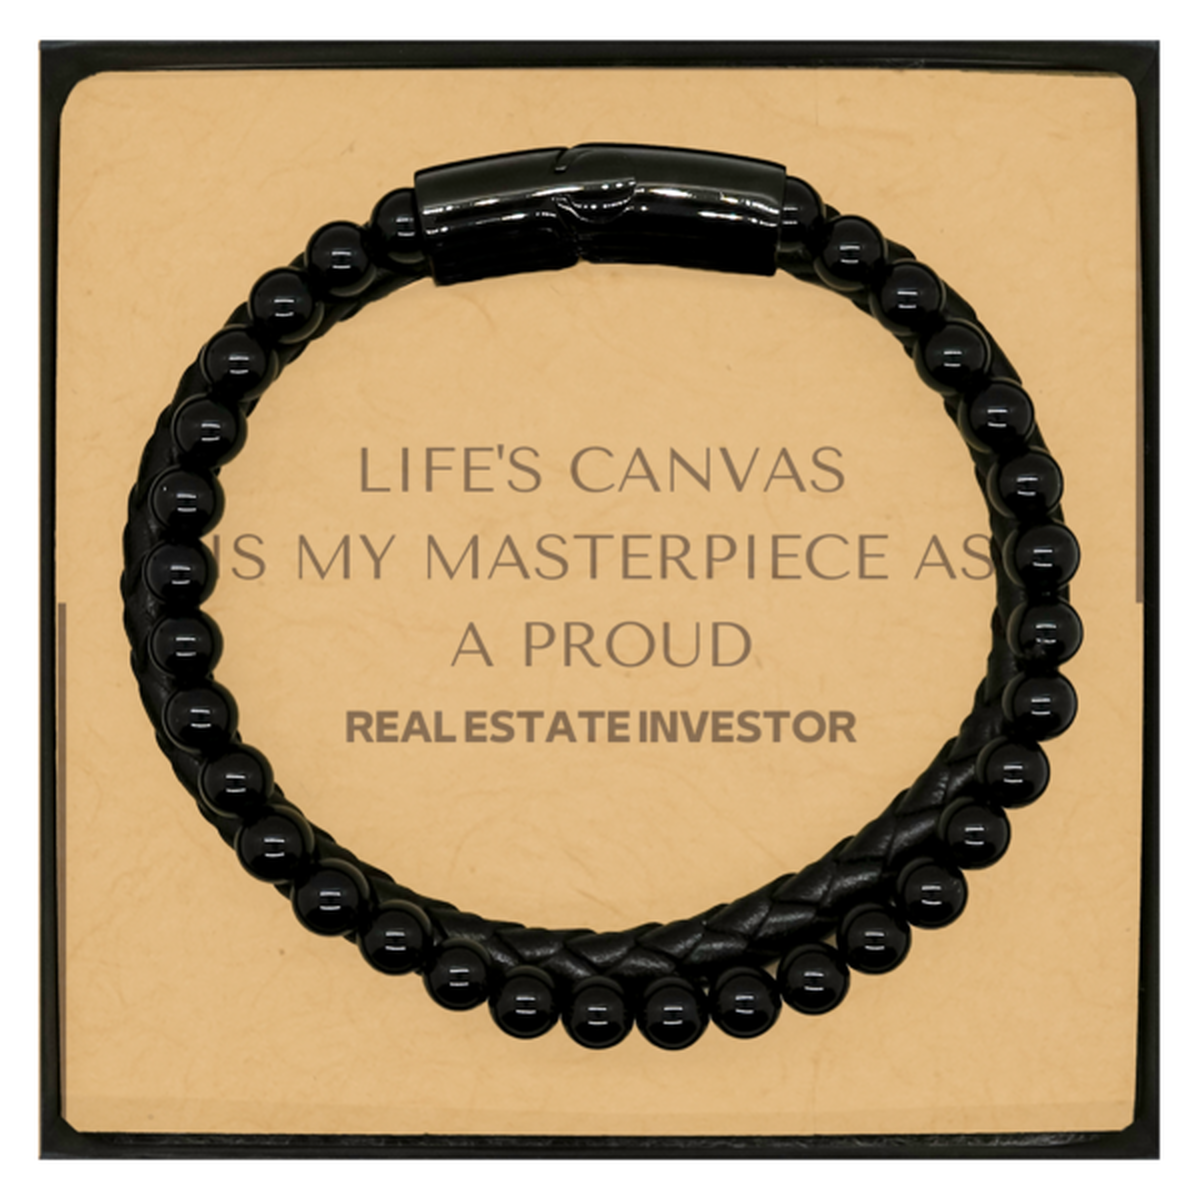 Proud Real Estate Investor Gifts, Life's canvas is my masterpiece, Epic Birthday Christmas Unique Stone Leather Bracelets For Real Estate Investor, Coworkers, Men, Women, Friends